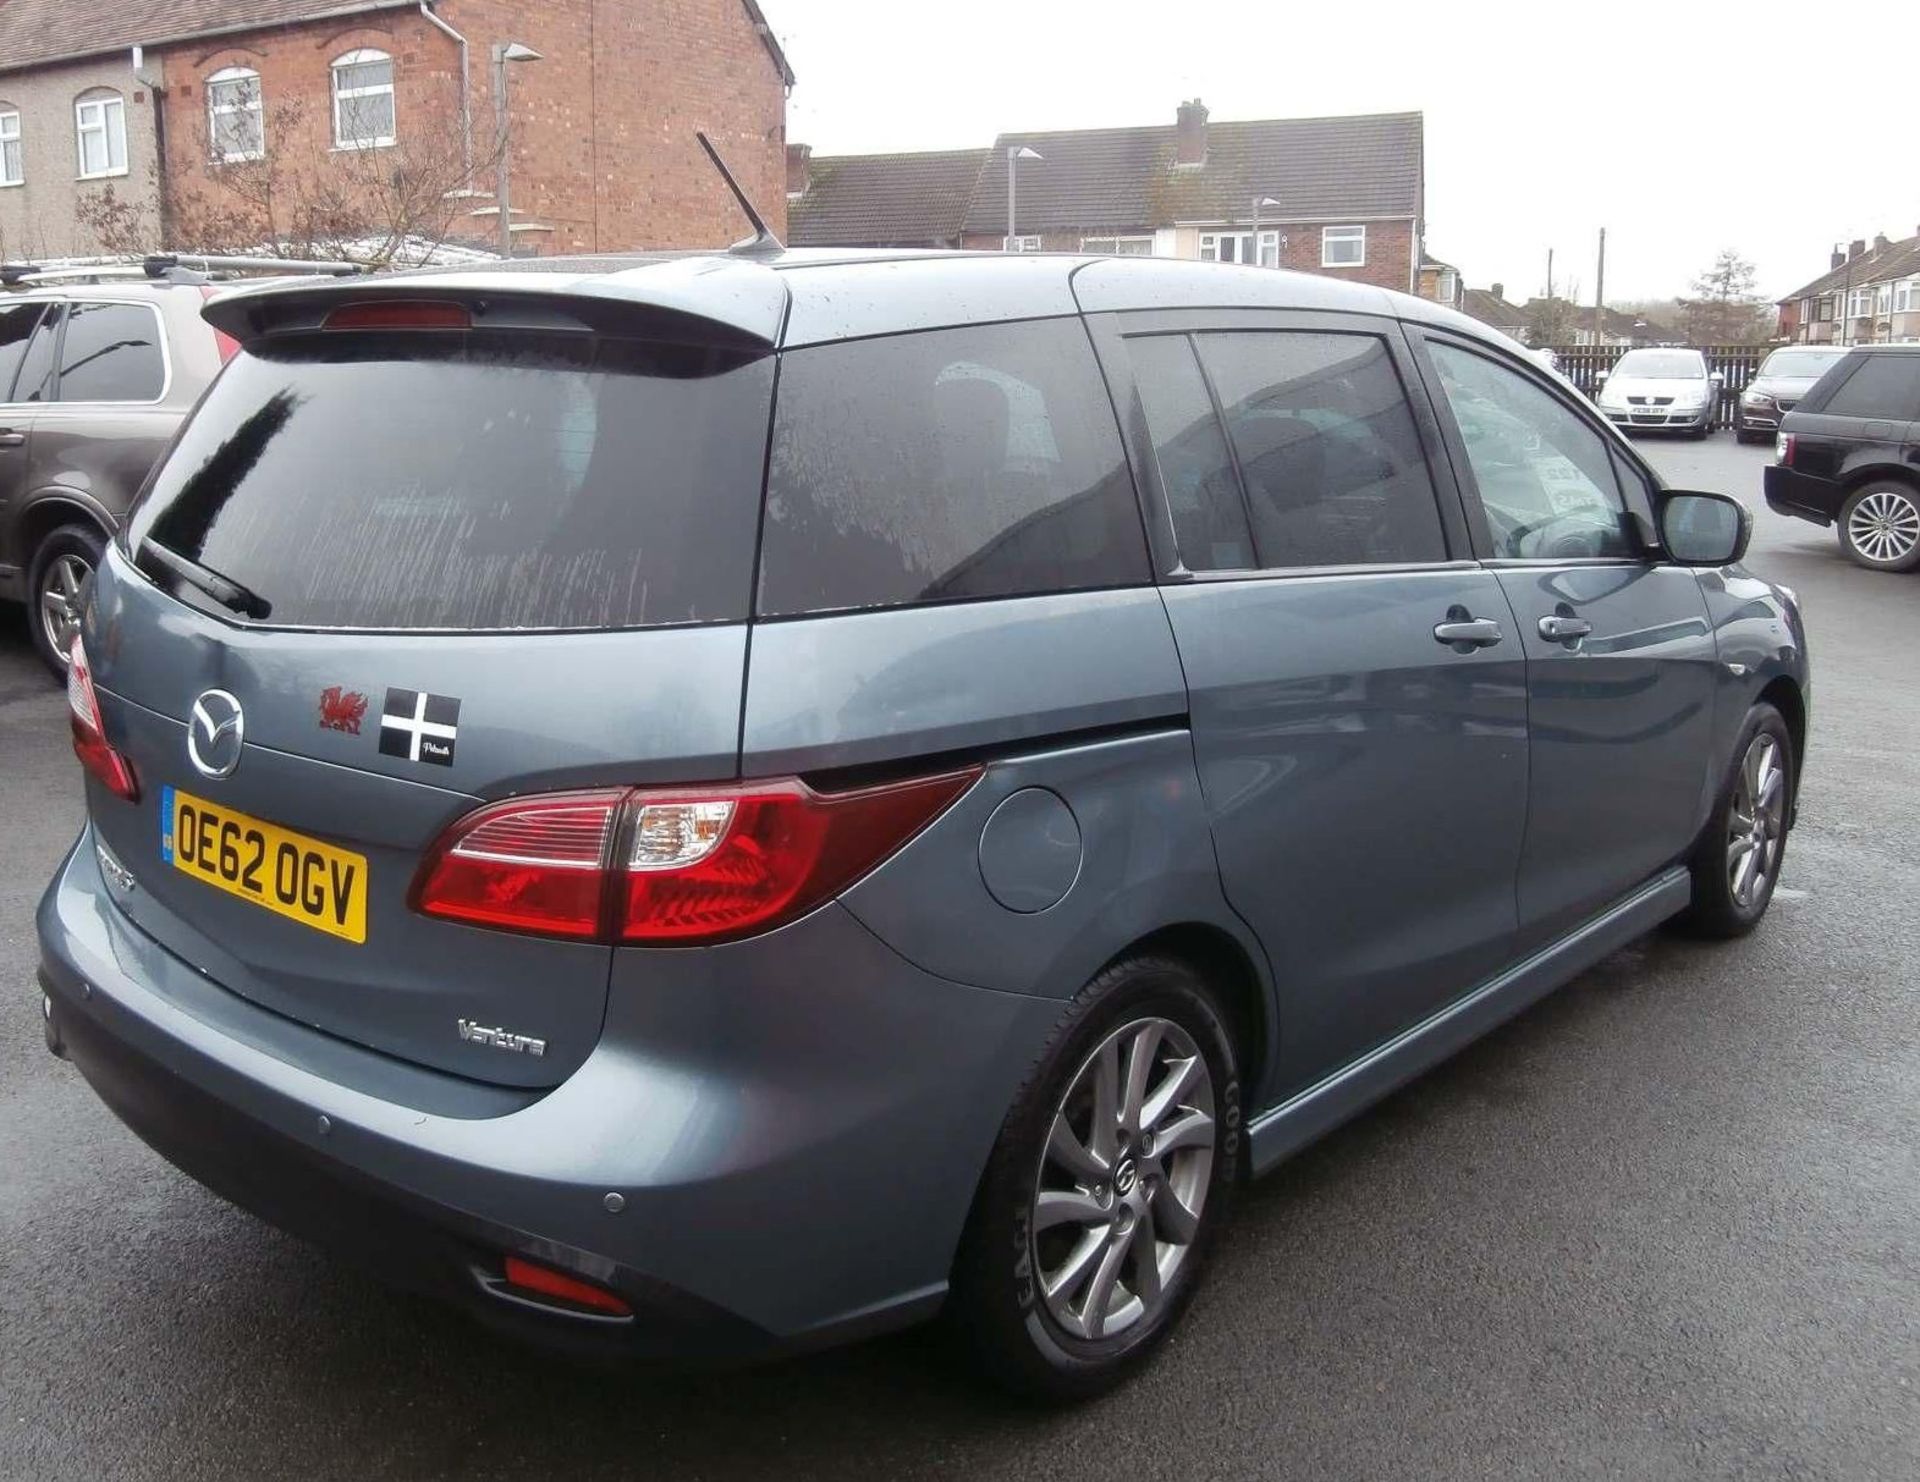 2013 Mazda 5 2.0 Venture Edition 5 Dr MPV - CL505 - NO VAT ON THE HAMMER - Location: Corby, N - Image 2 of 18